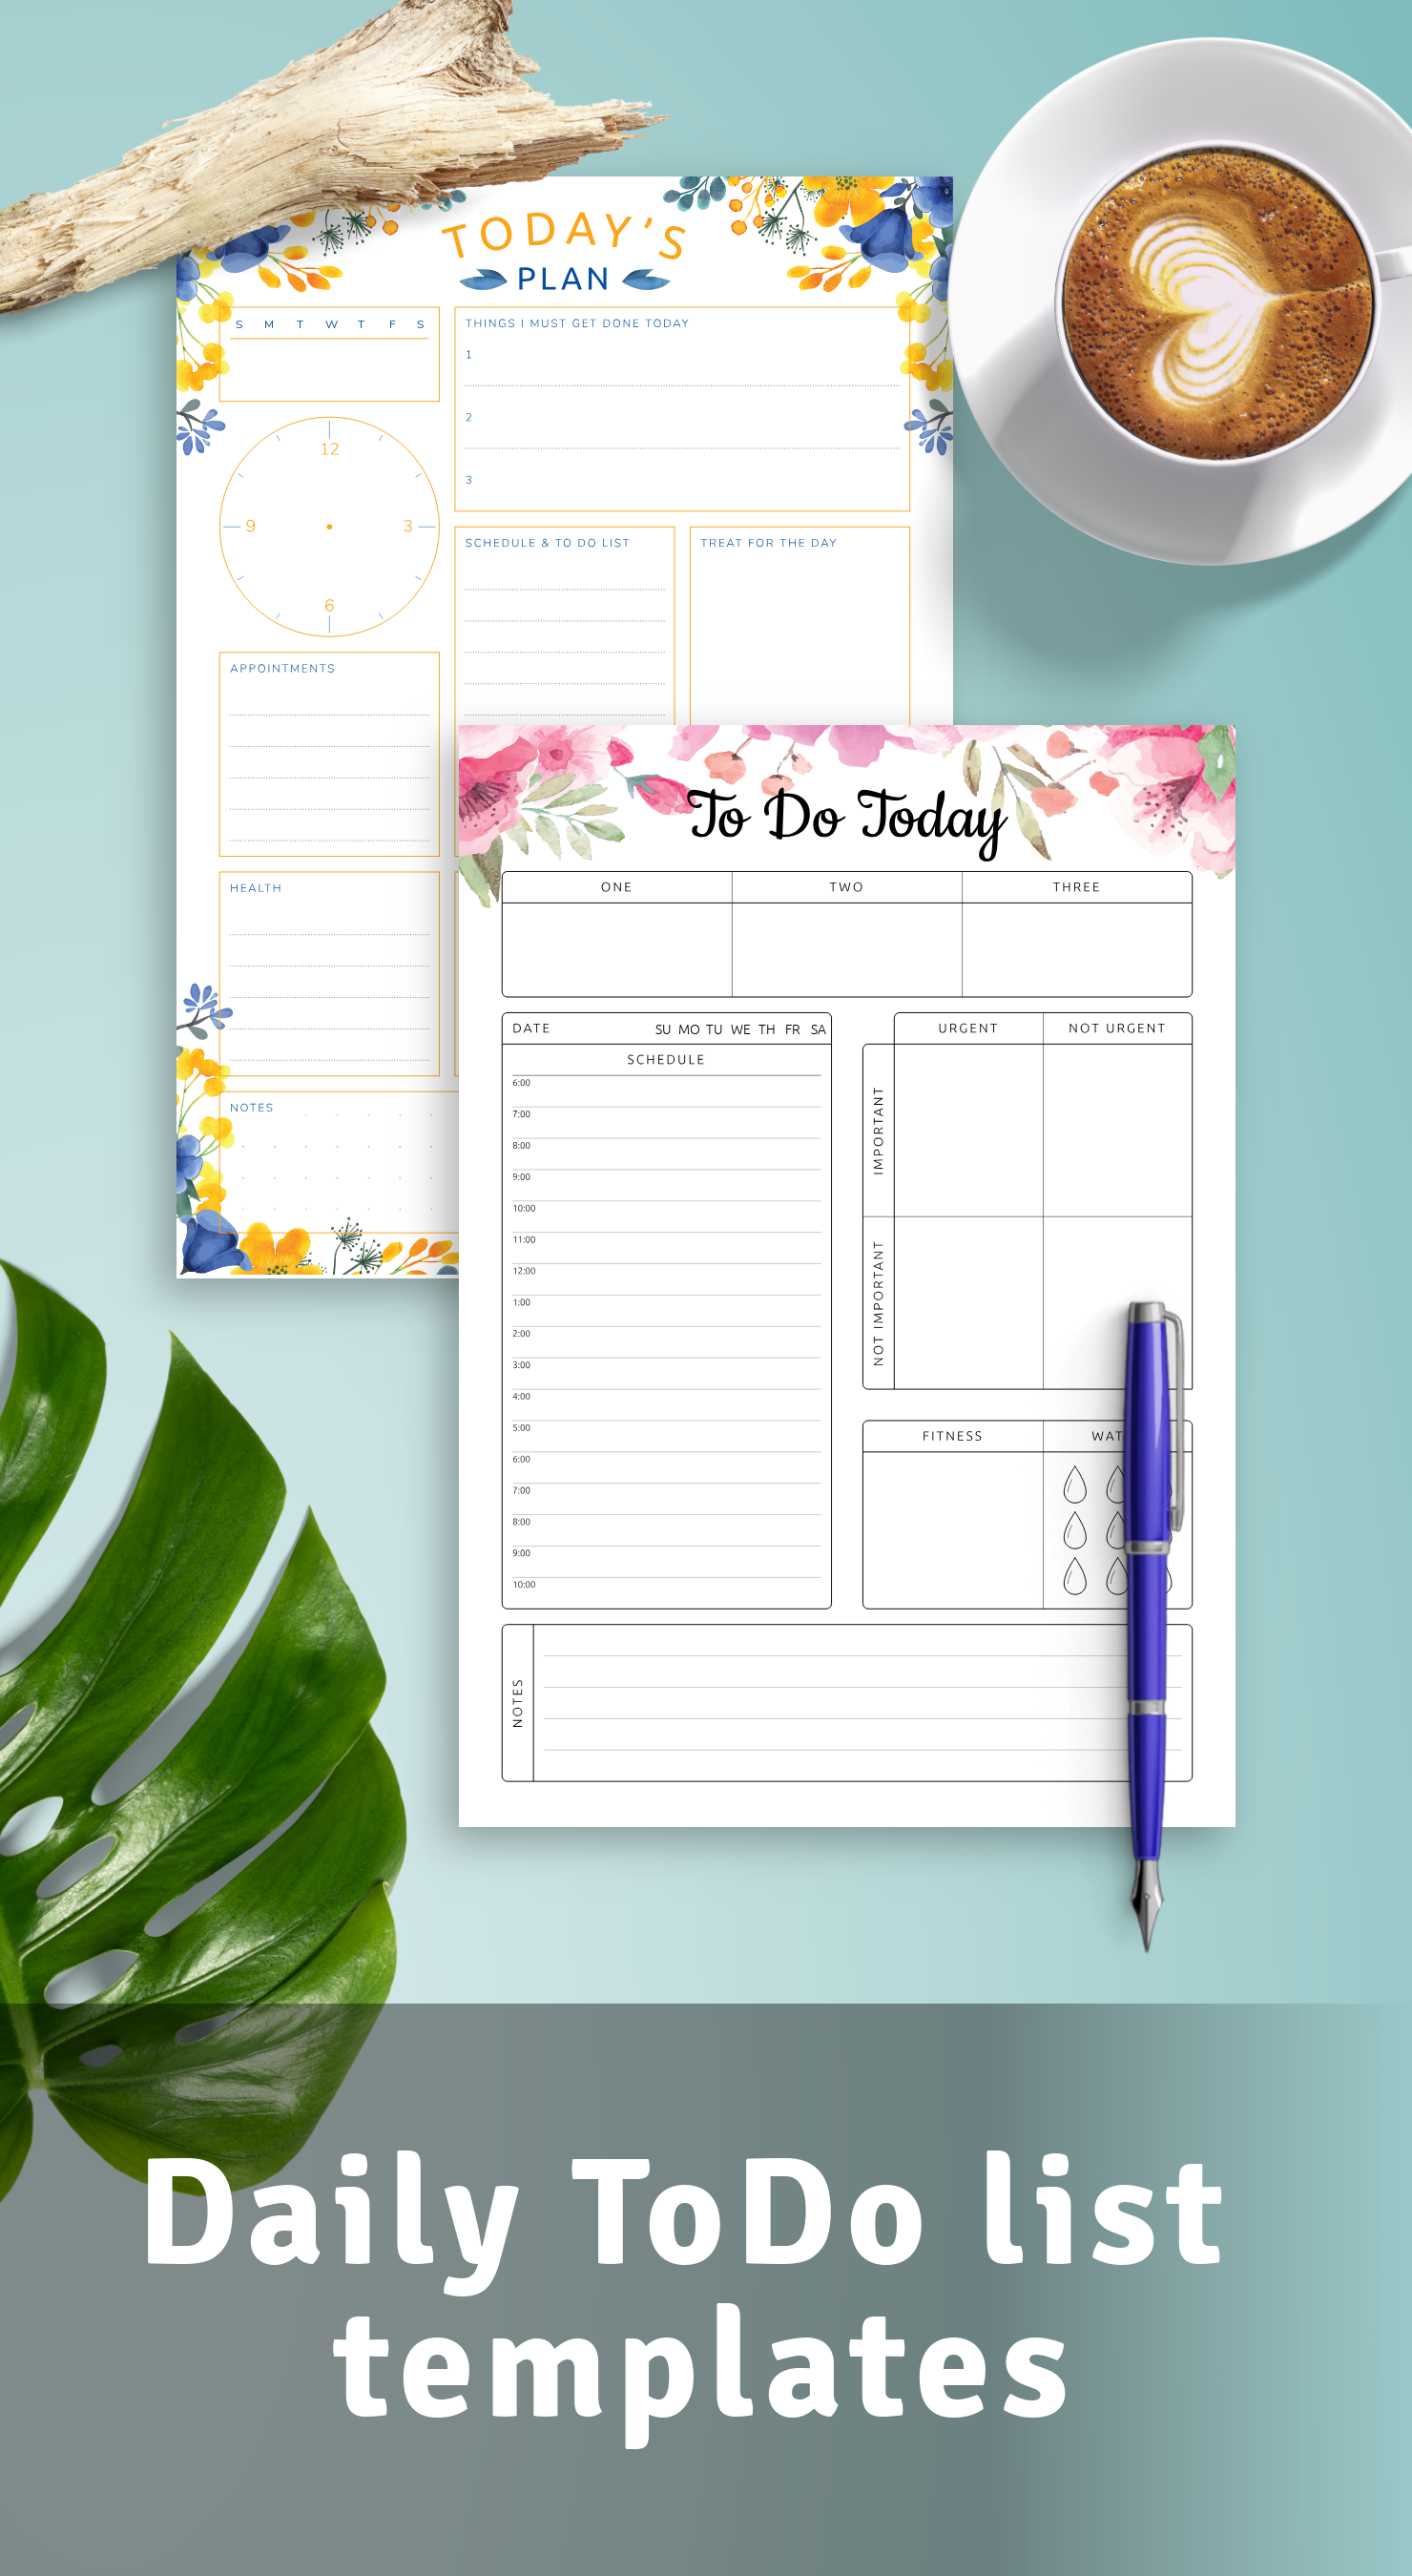 Best Daily ToDo List Templates